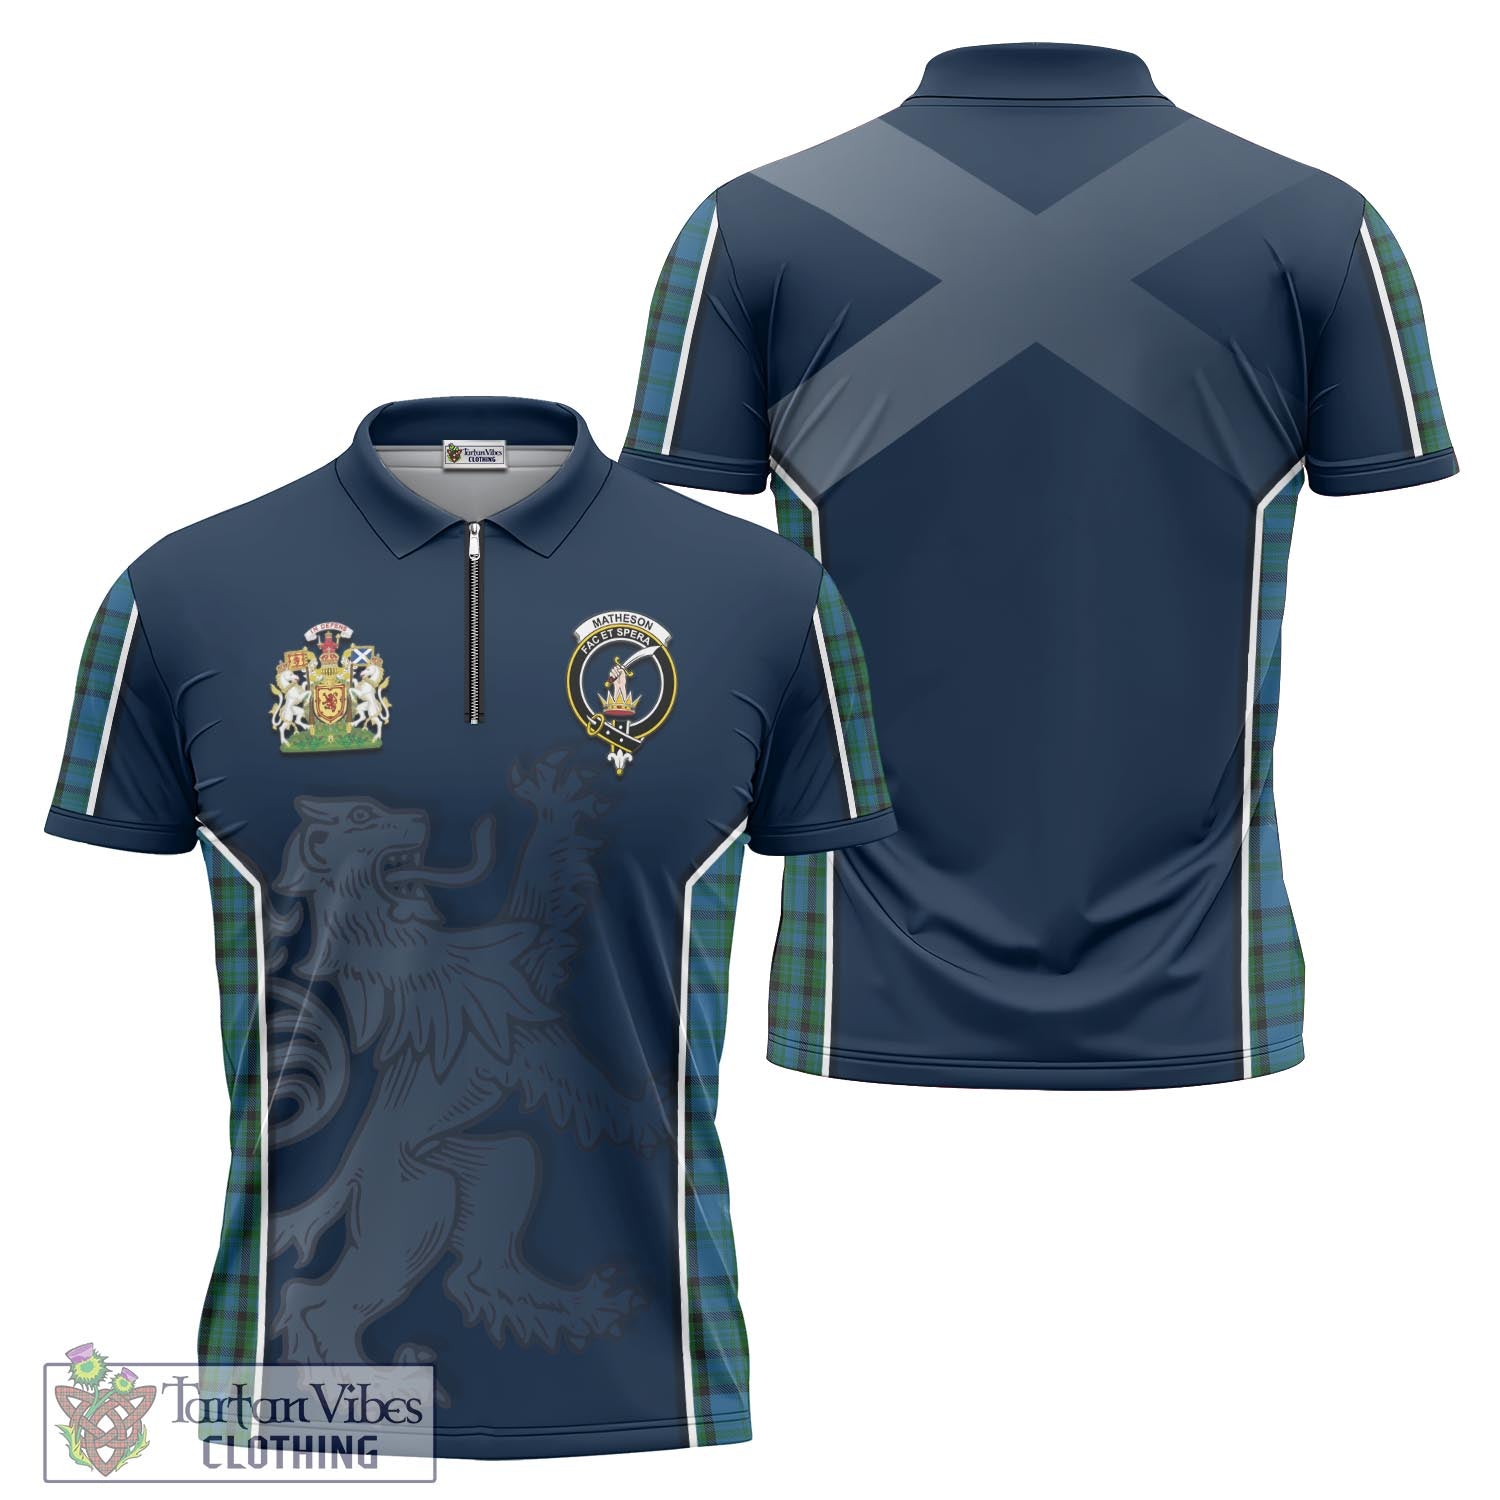 Tartan Vibes Clothing Matheson Hunting Tartan Zipper Polo Shirt with Family Crest and Lion Rampant Vibes Sport Style